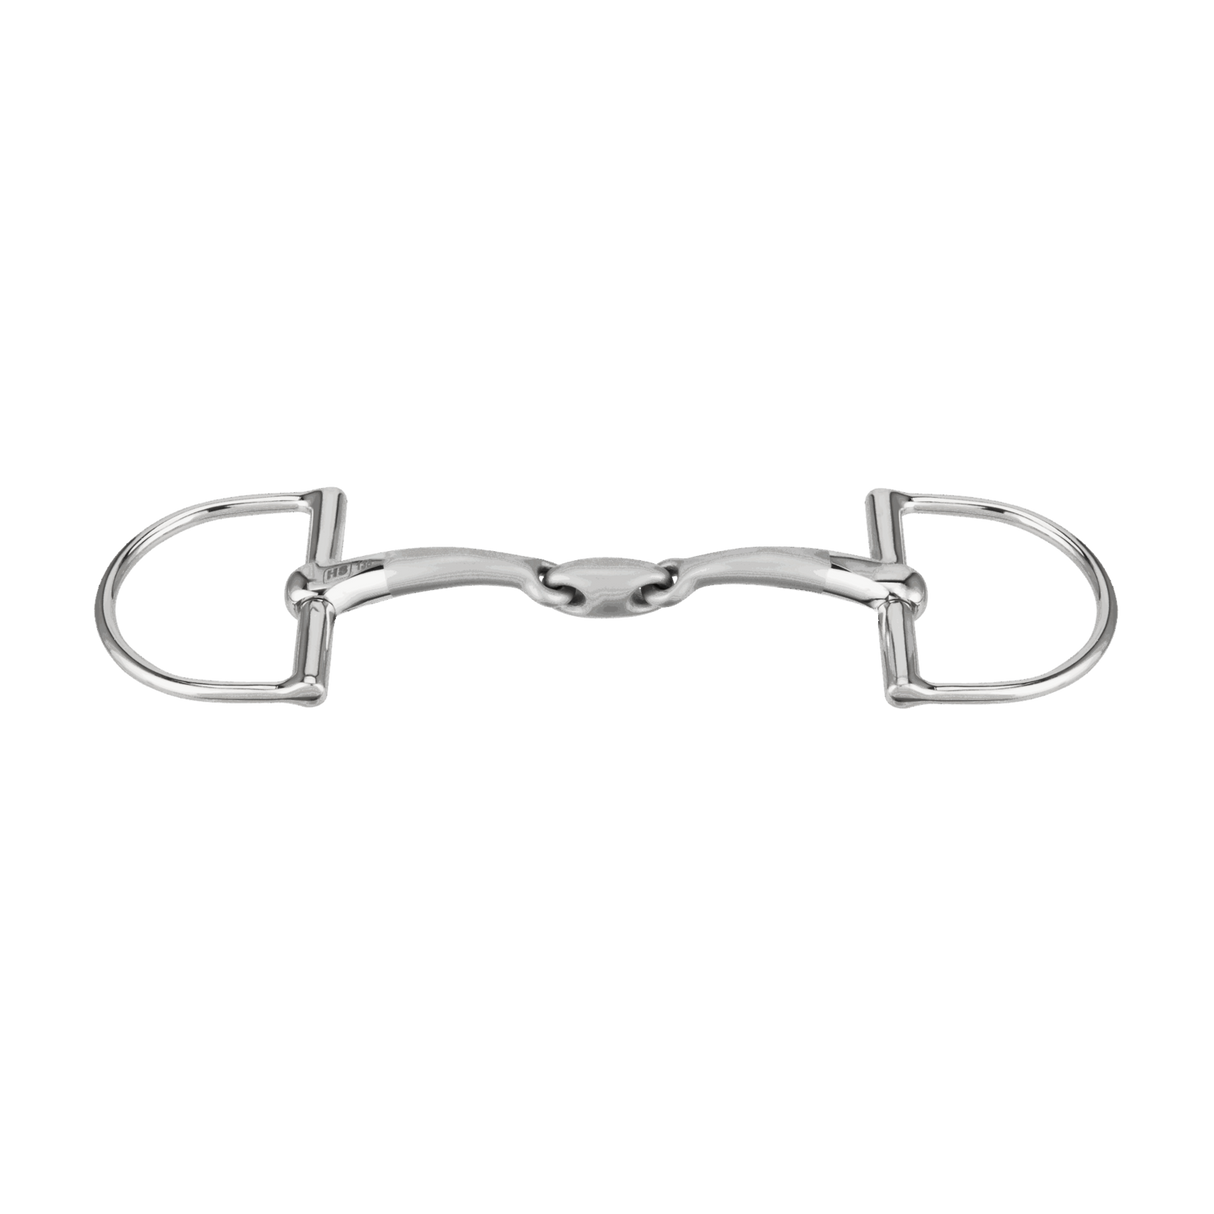 Sprenger Satinox D-Ring 14mm Stainless Steel Double Jointed 90mm Ring Snaffle